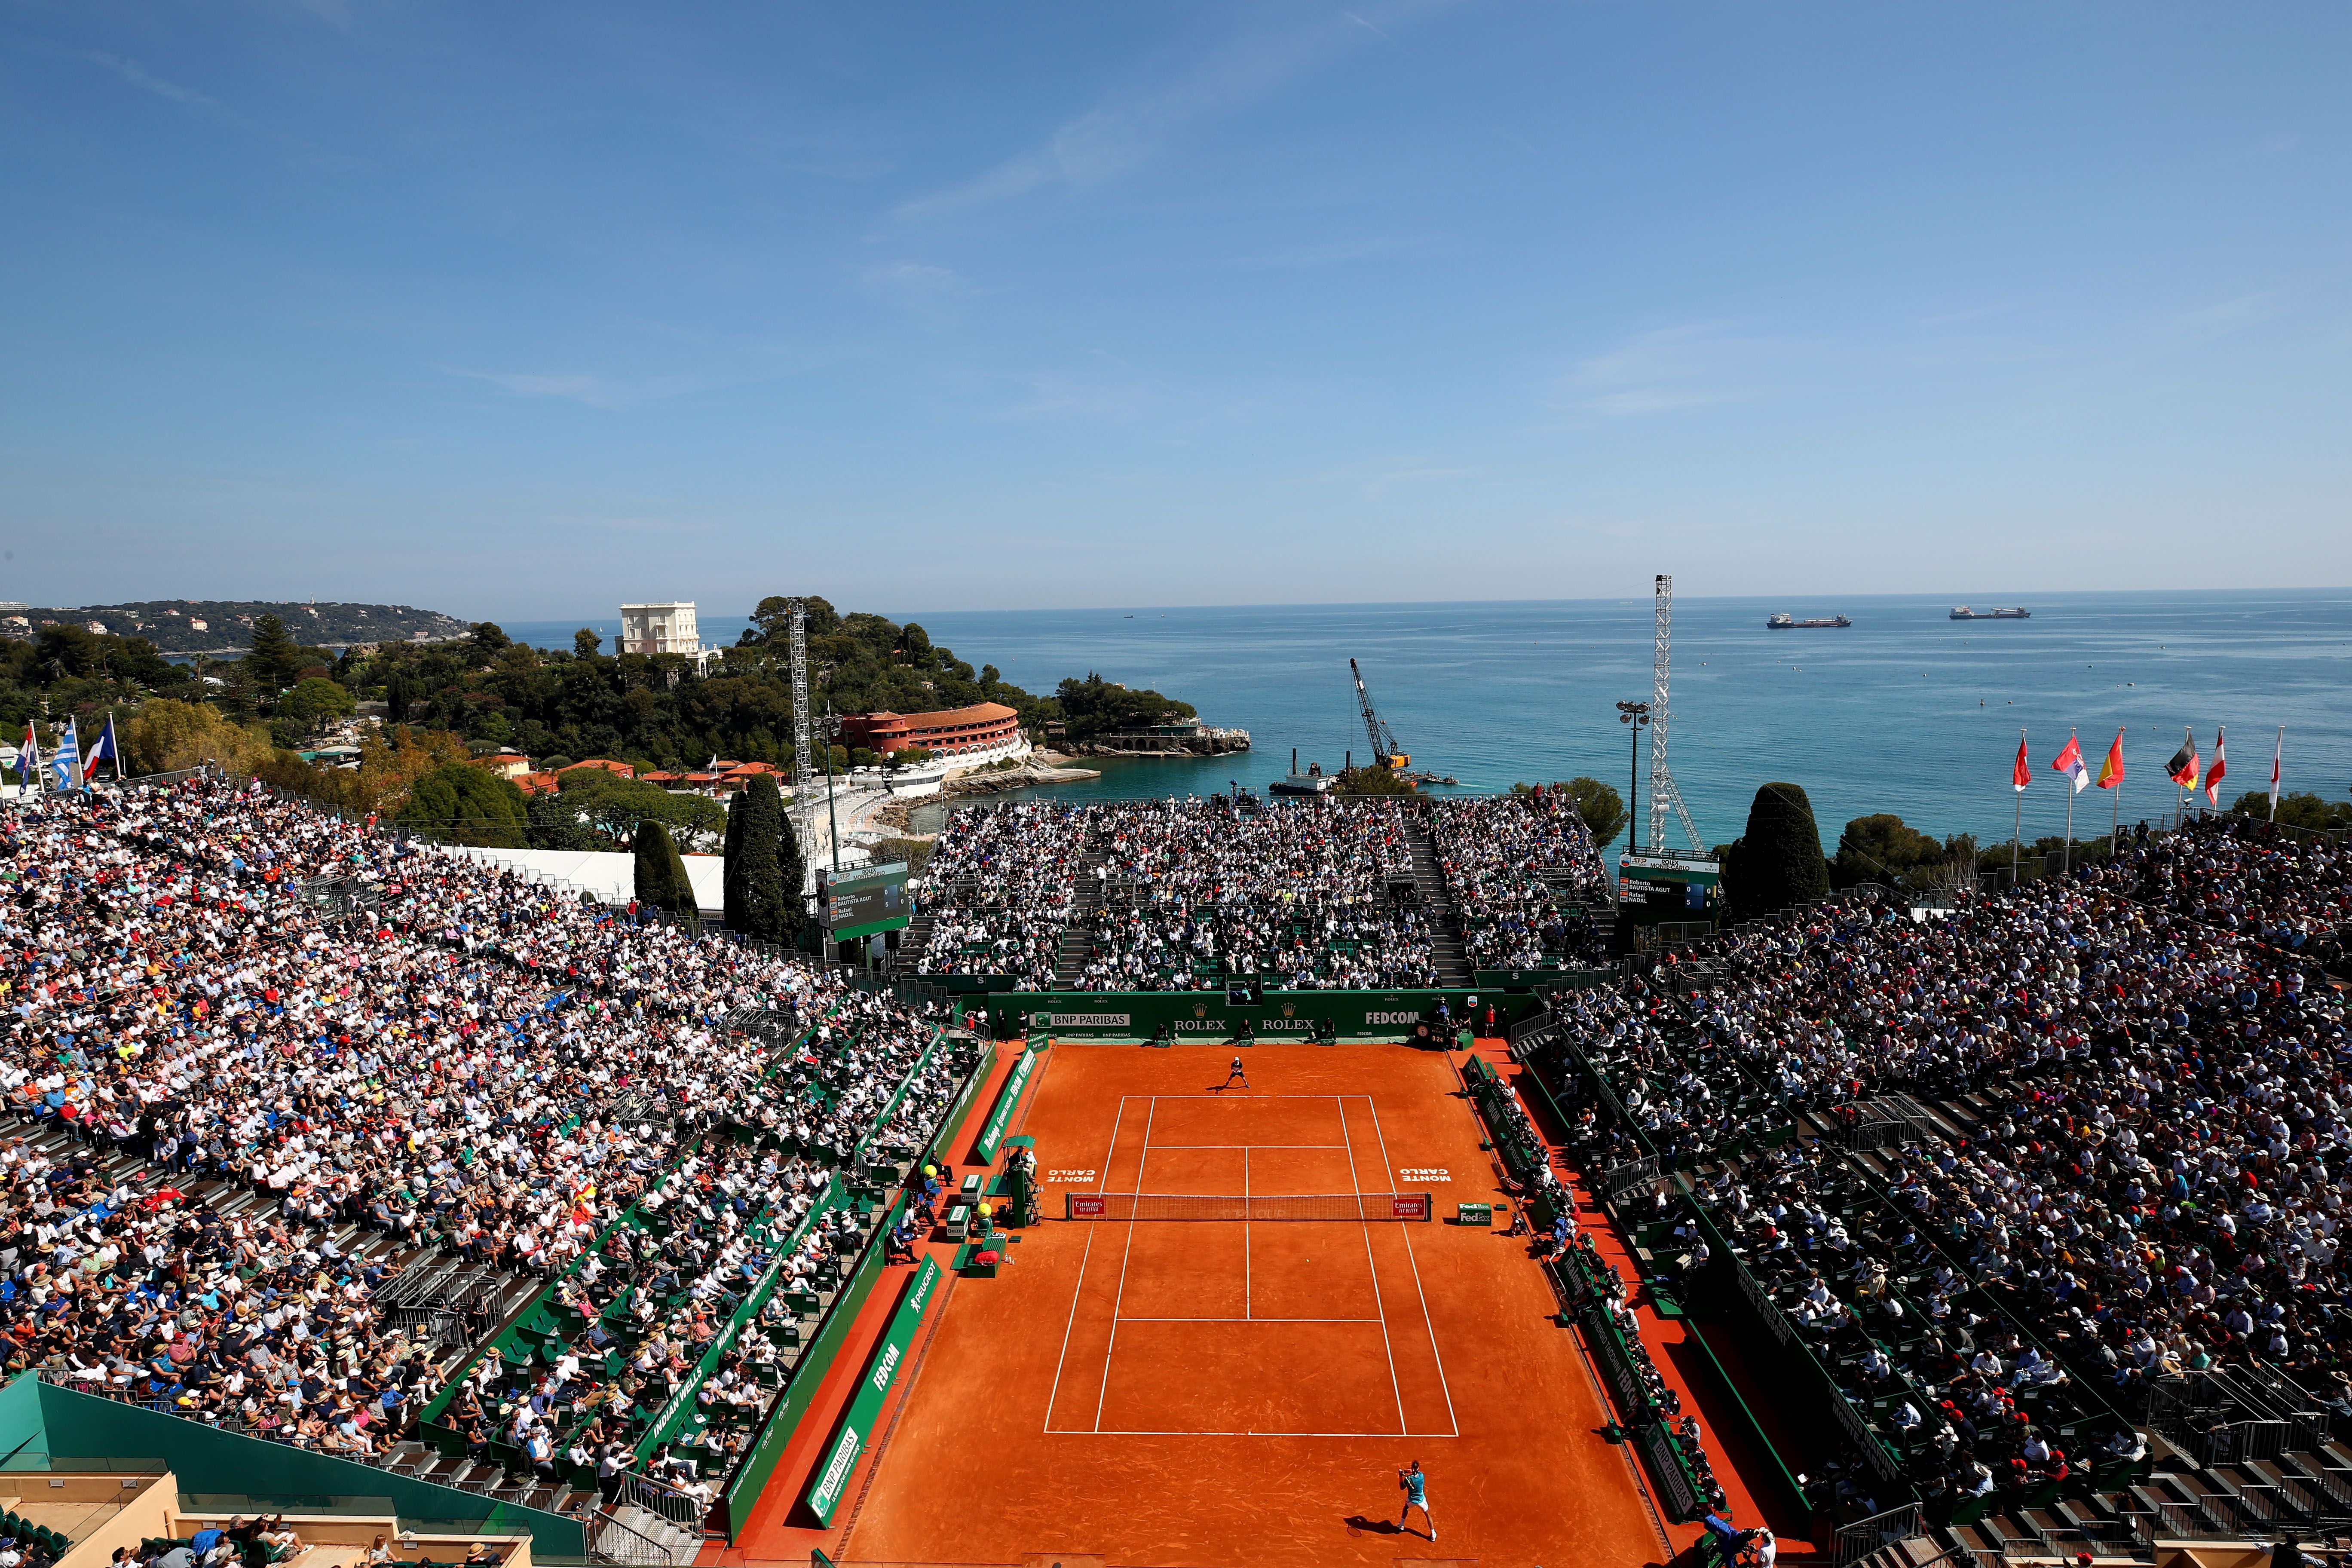 The court at the Monte-Carlo Masters